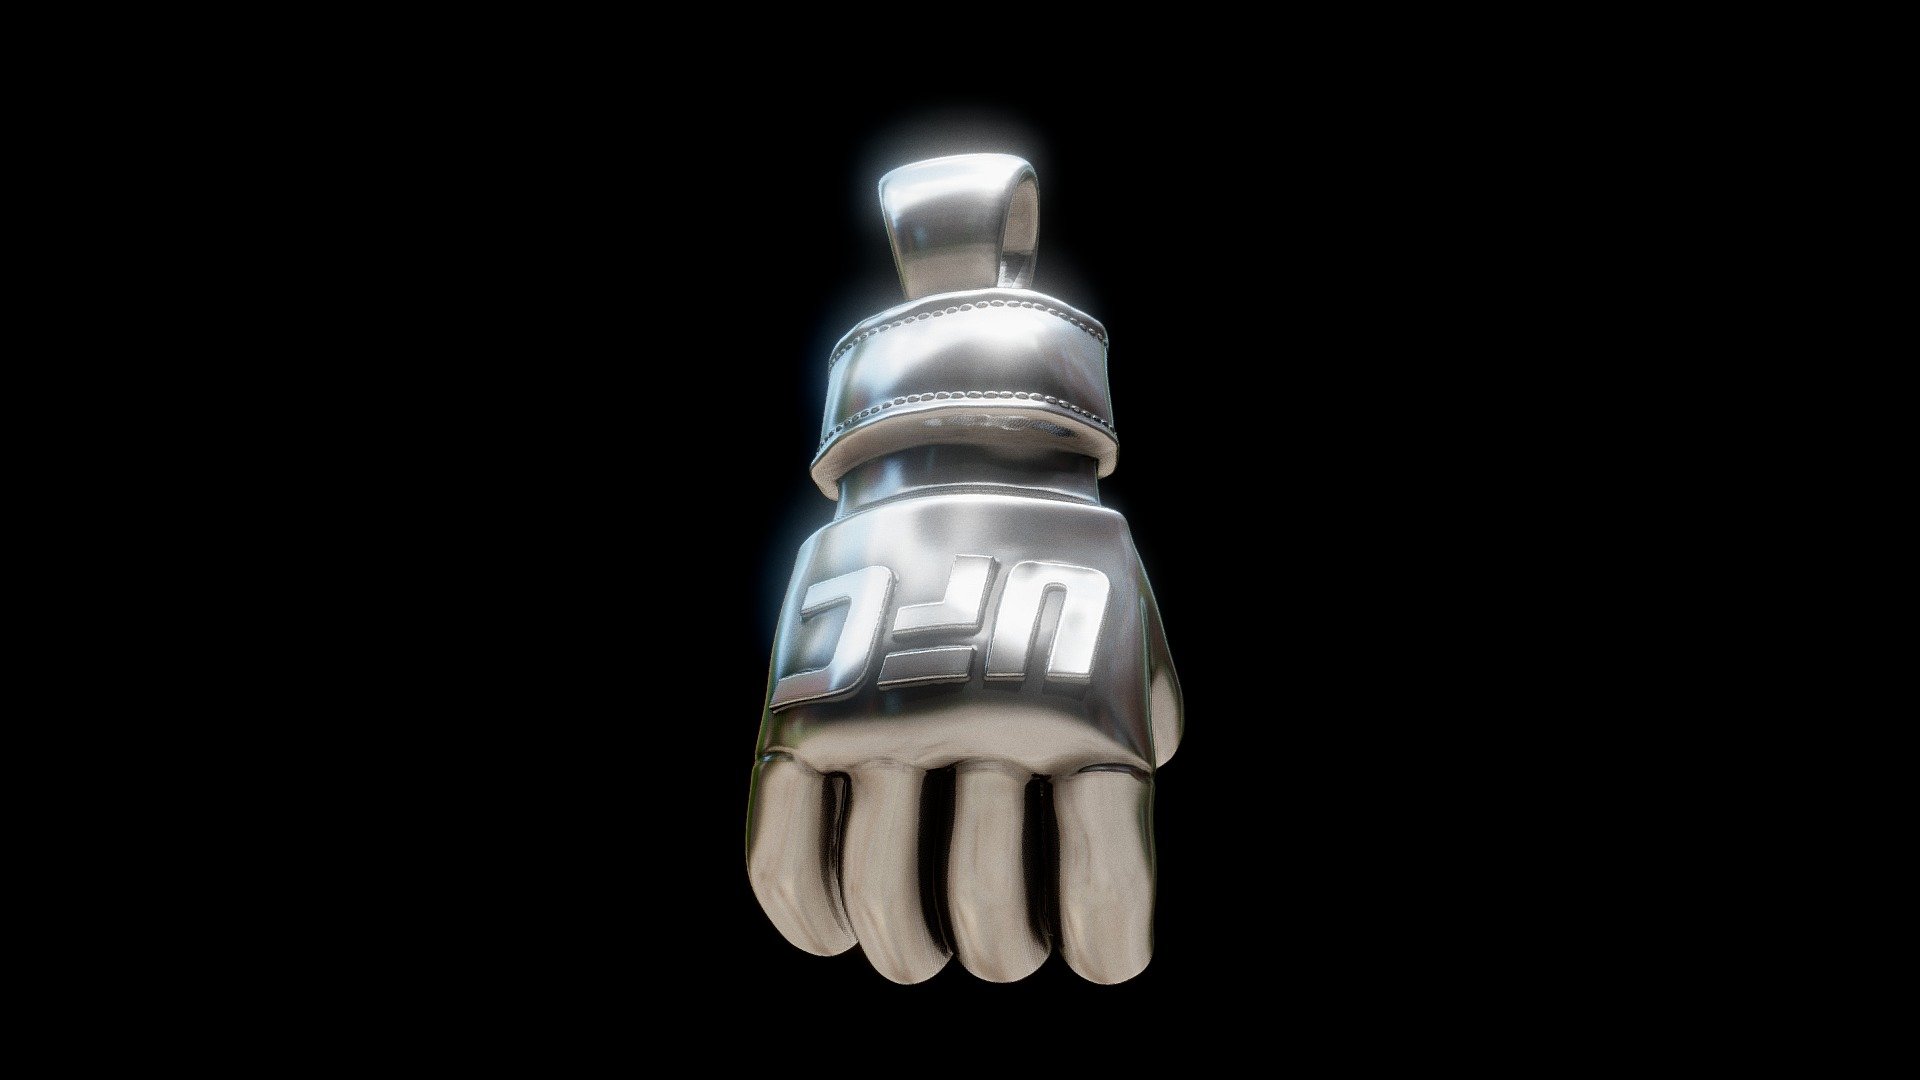 Hey guys !!!!

UFC Glove made with Zbrush from a 3D model

Designed to be cast in silver 

Stay tuned - UFC Glove Pendant - 3D model by 3DM Design (@3dmdesign) 3d model